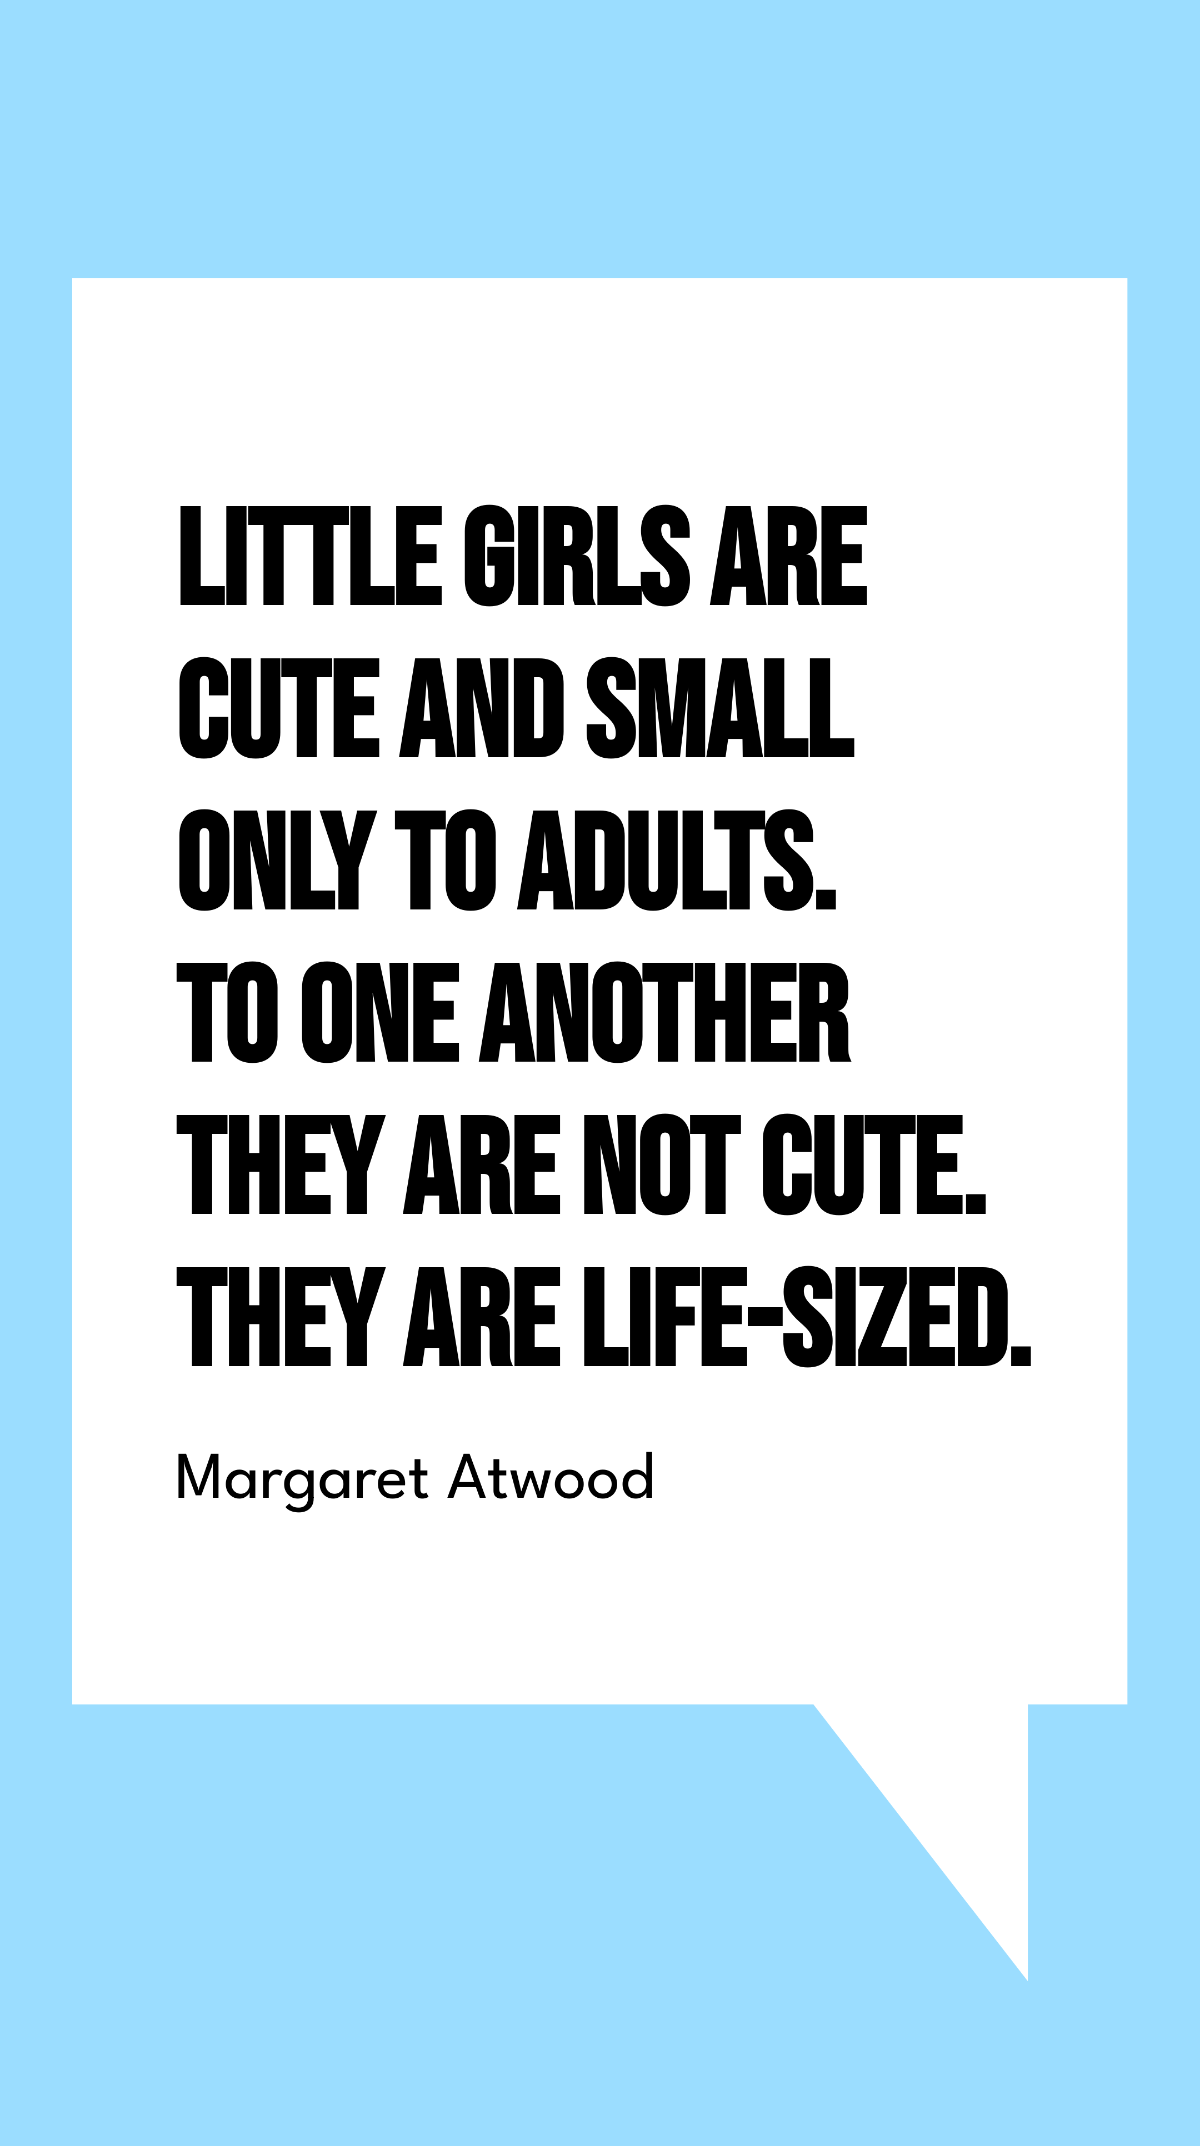 Margaret Atwood - Little girls are cute and small only to adults. To one another they are not cute. They are life-sized.